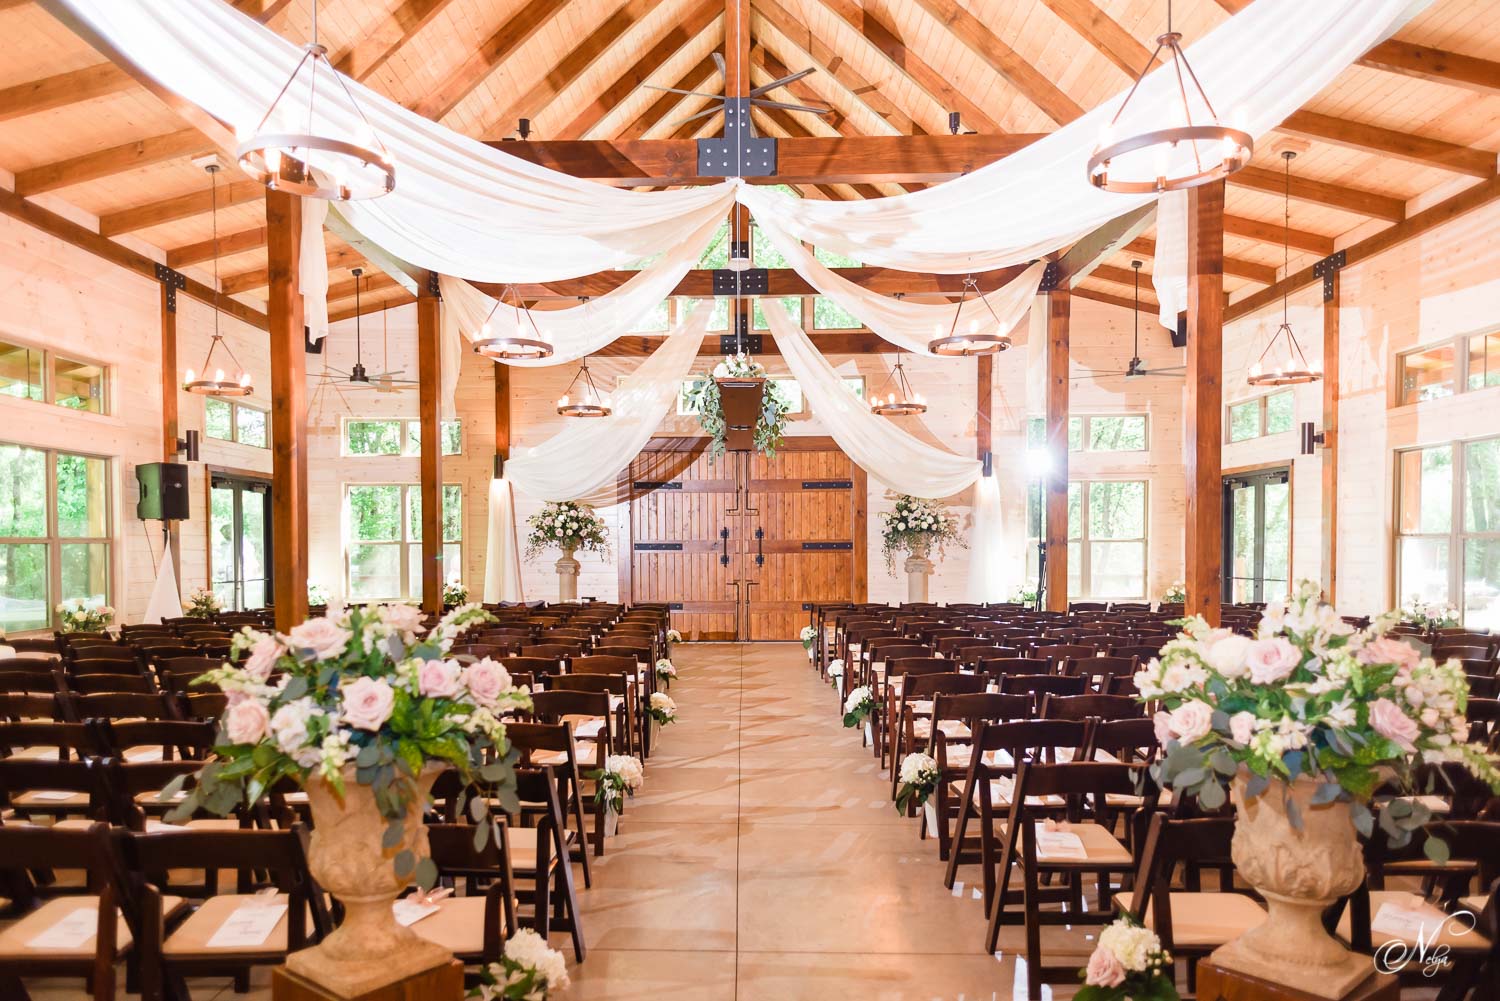 indoor wedding ceremony withchairs from Bradley Rental of Cleveland TN at Hiwassee River weddings